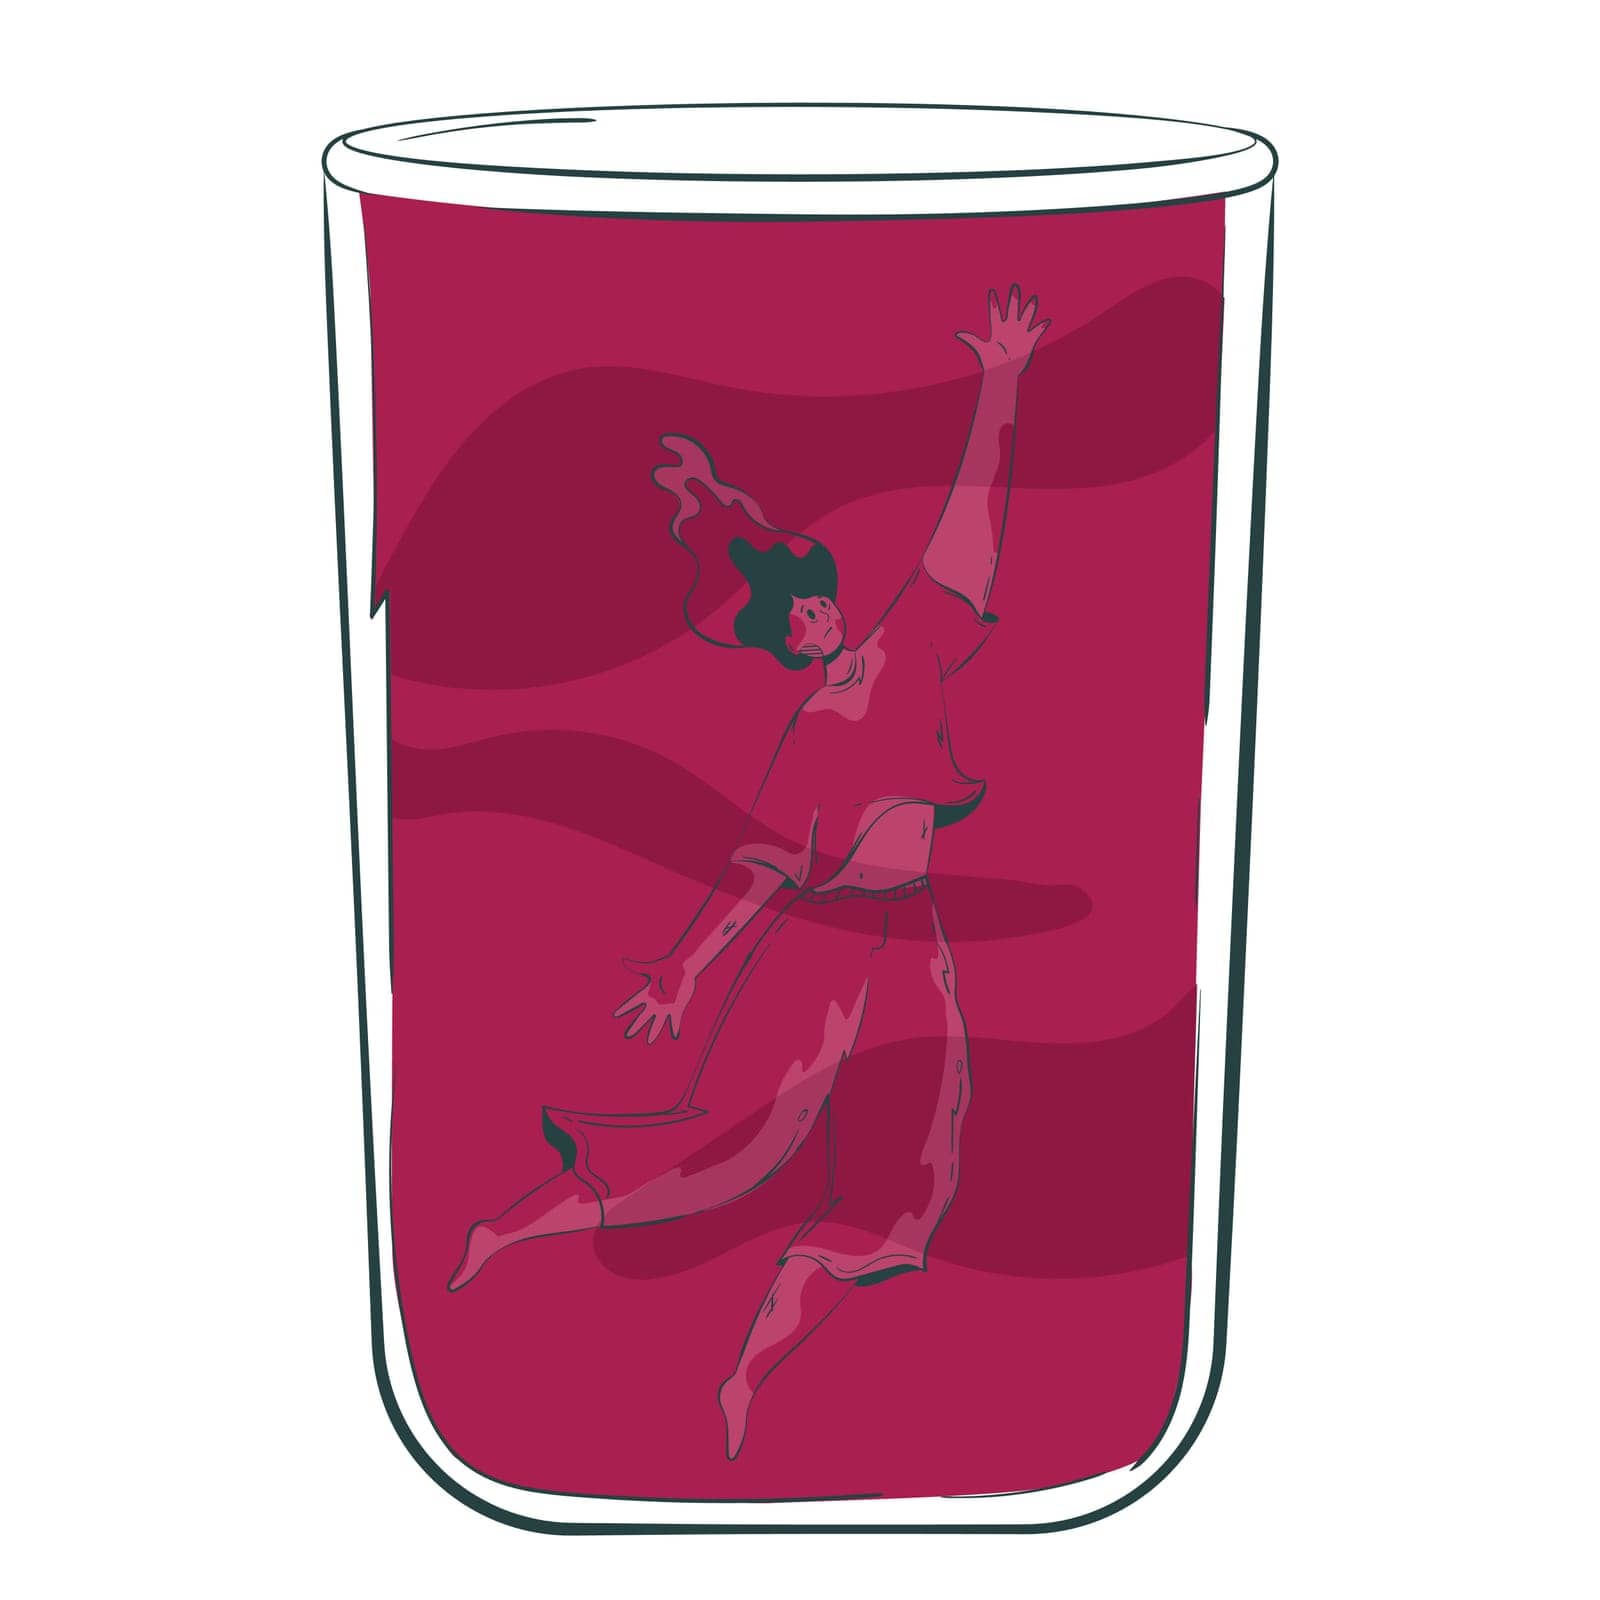 woman on a drunken spree. Conceptual illustration of the consequences of alcoholism with a depressed character with alcohol addiction drowning in a glass of alcohol. Unhealthy Lifestyle